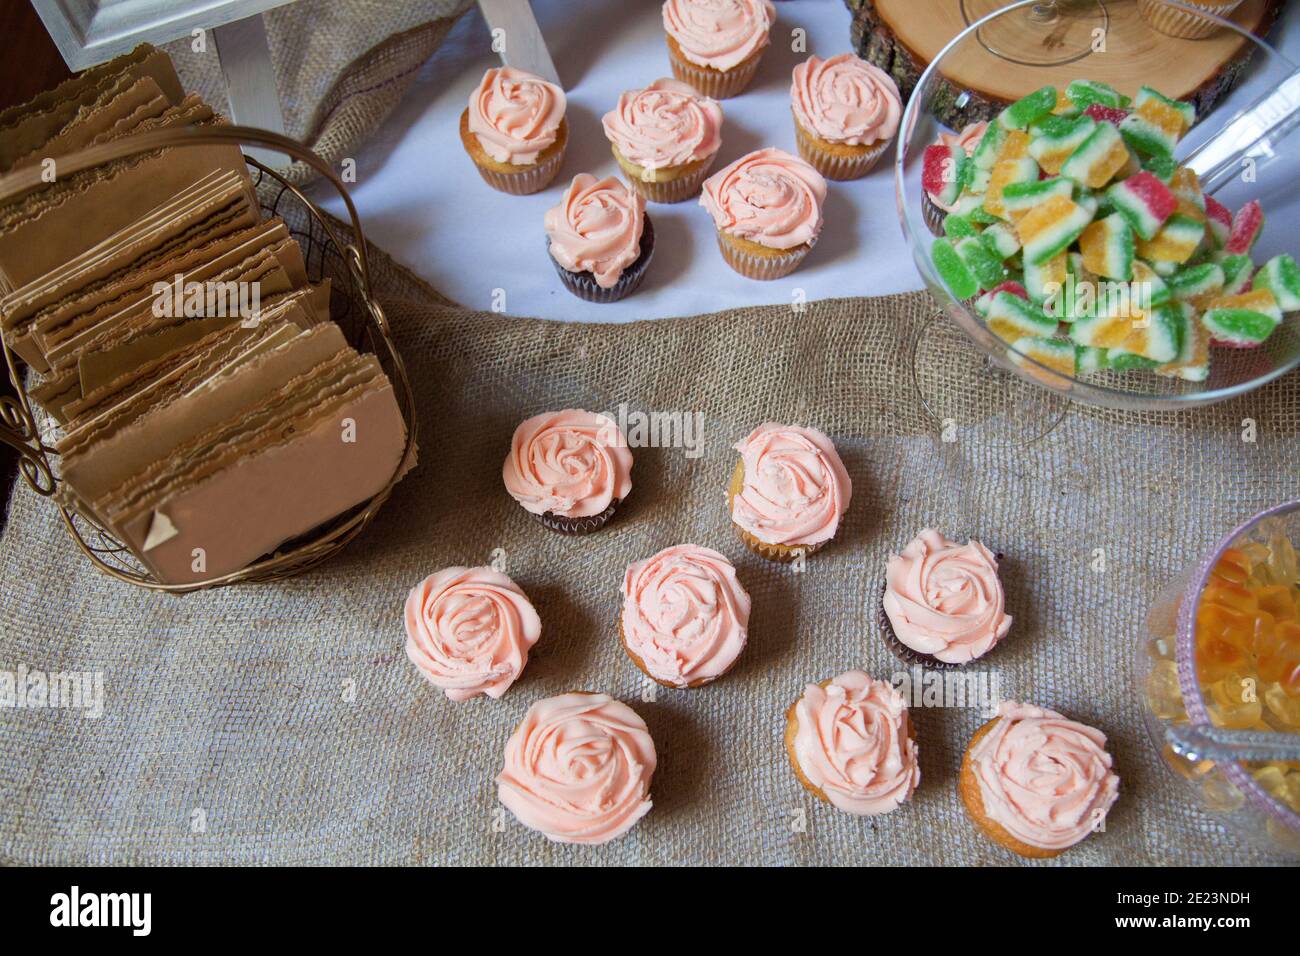 Pink frosted vanilla and chocolate cupcakes sit on a table cloth of burlap with other candies in the background as a dessert table for a wedding. Stock Photo